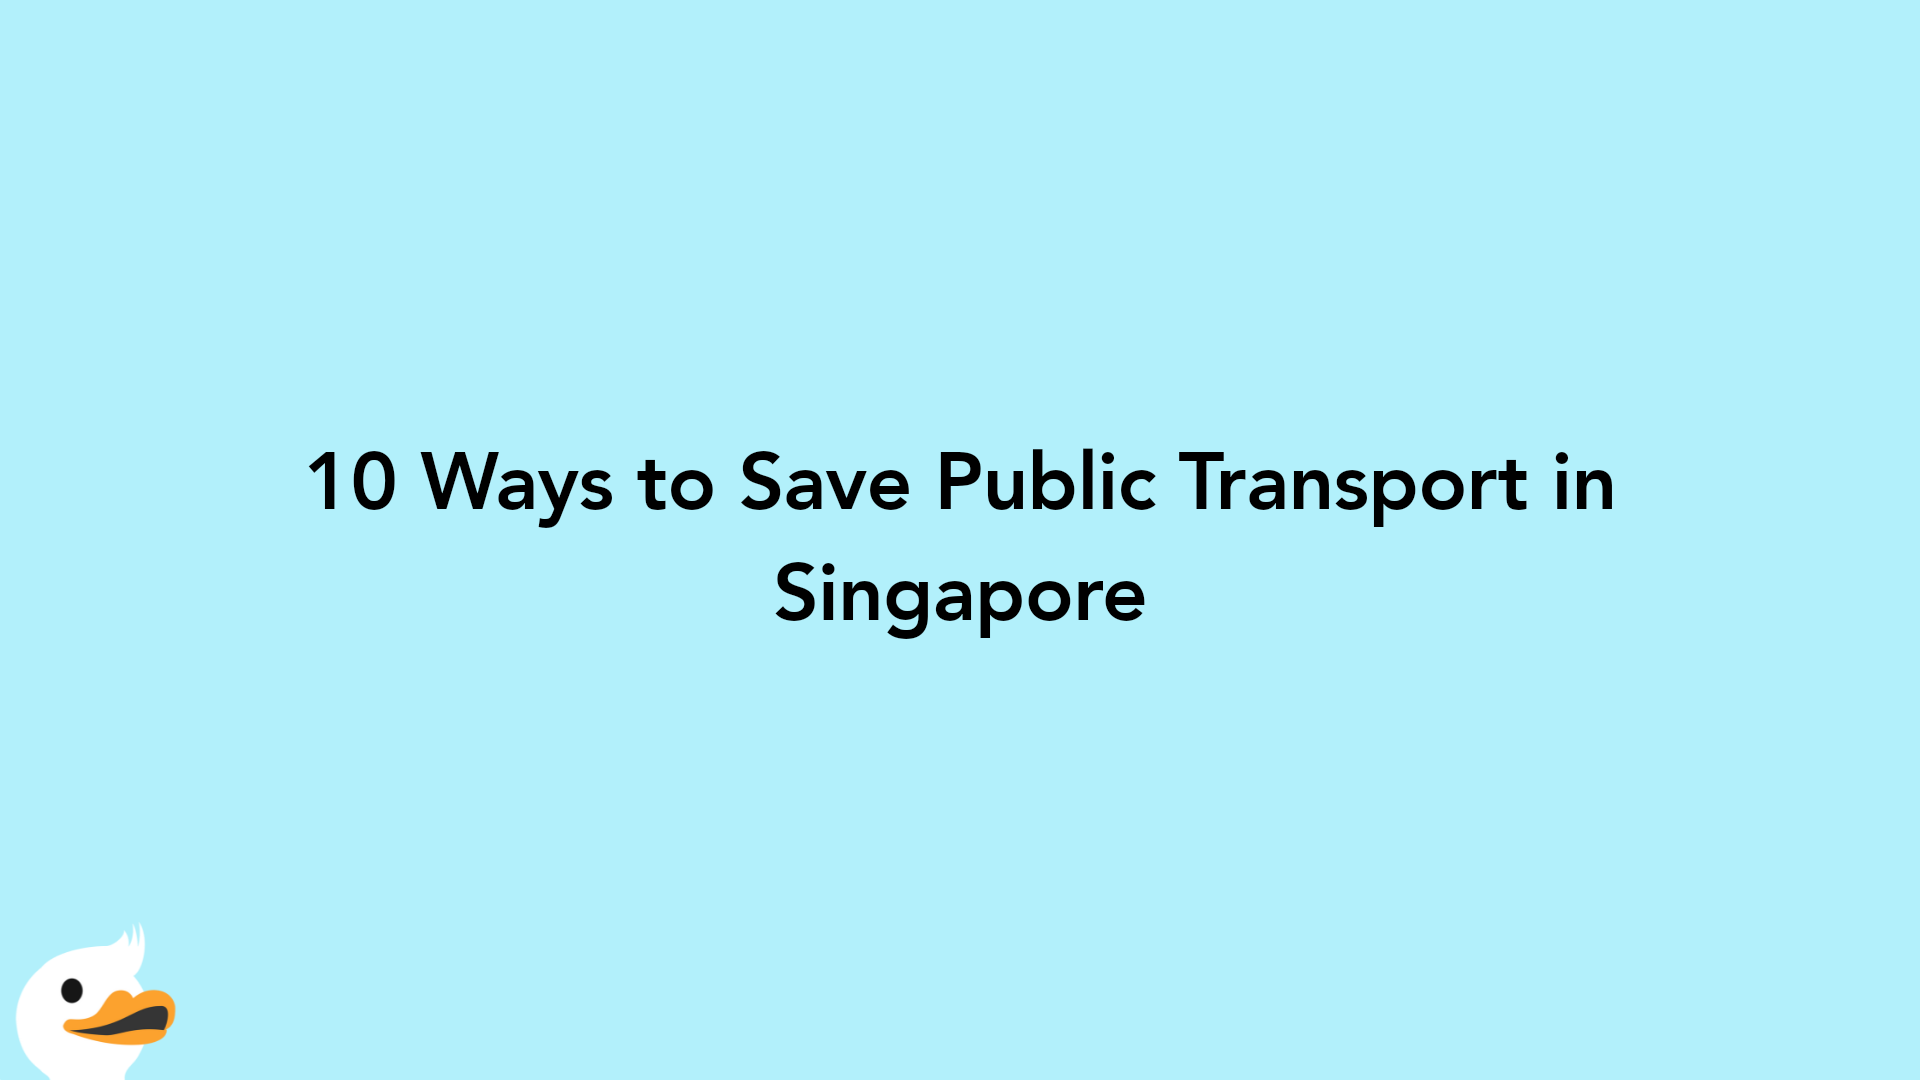 10 Ways to Save Public Transport in Singapore